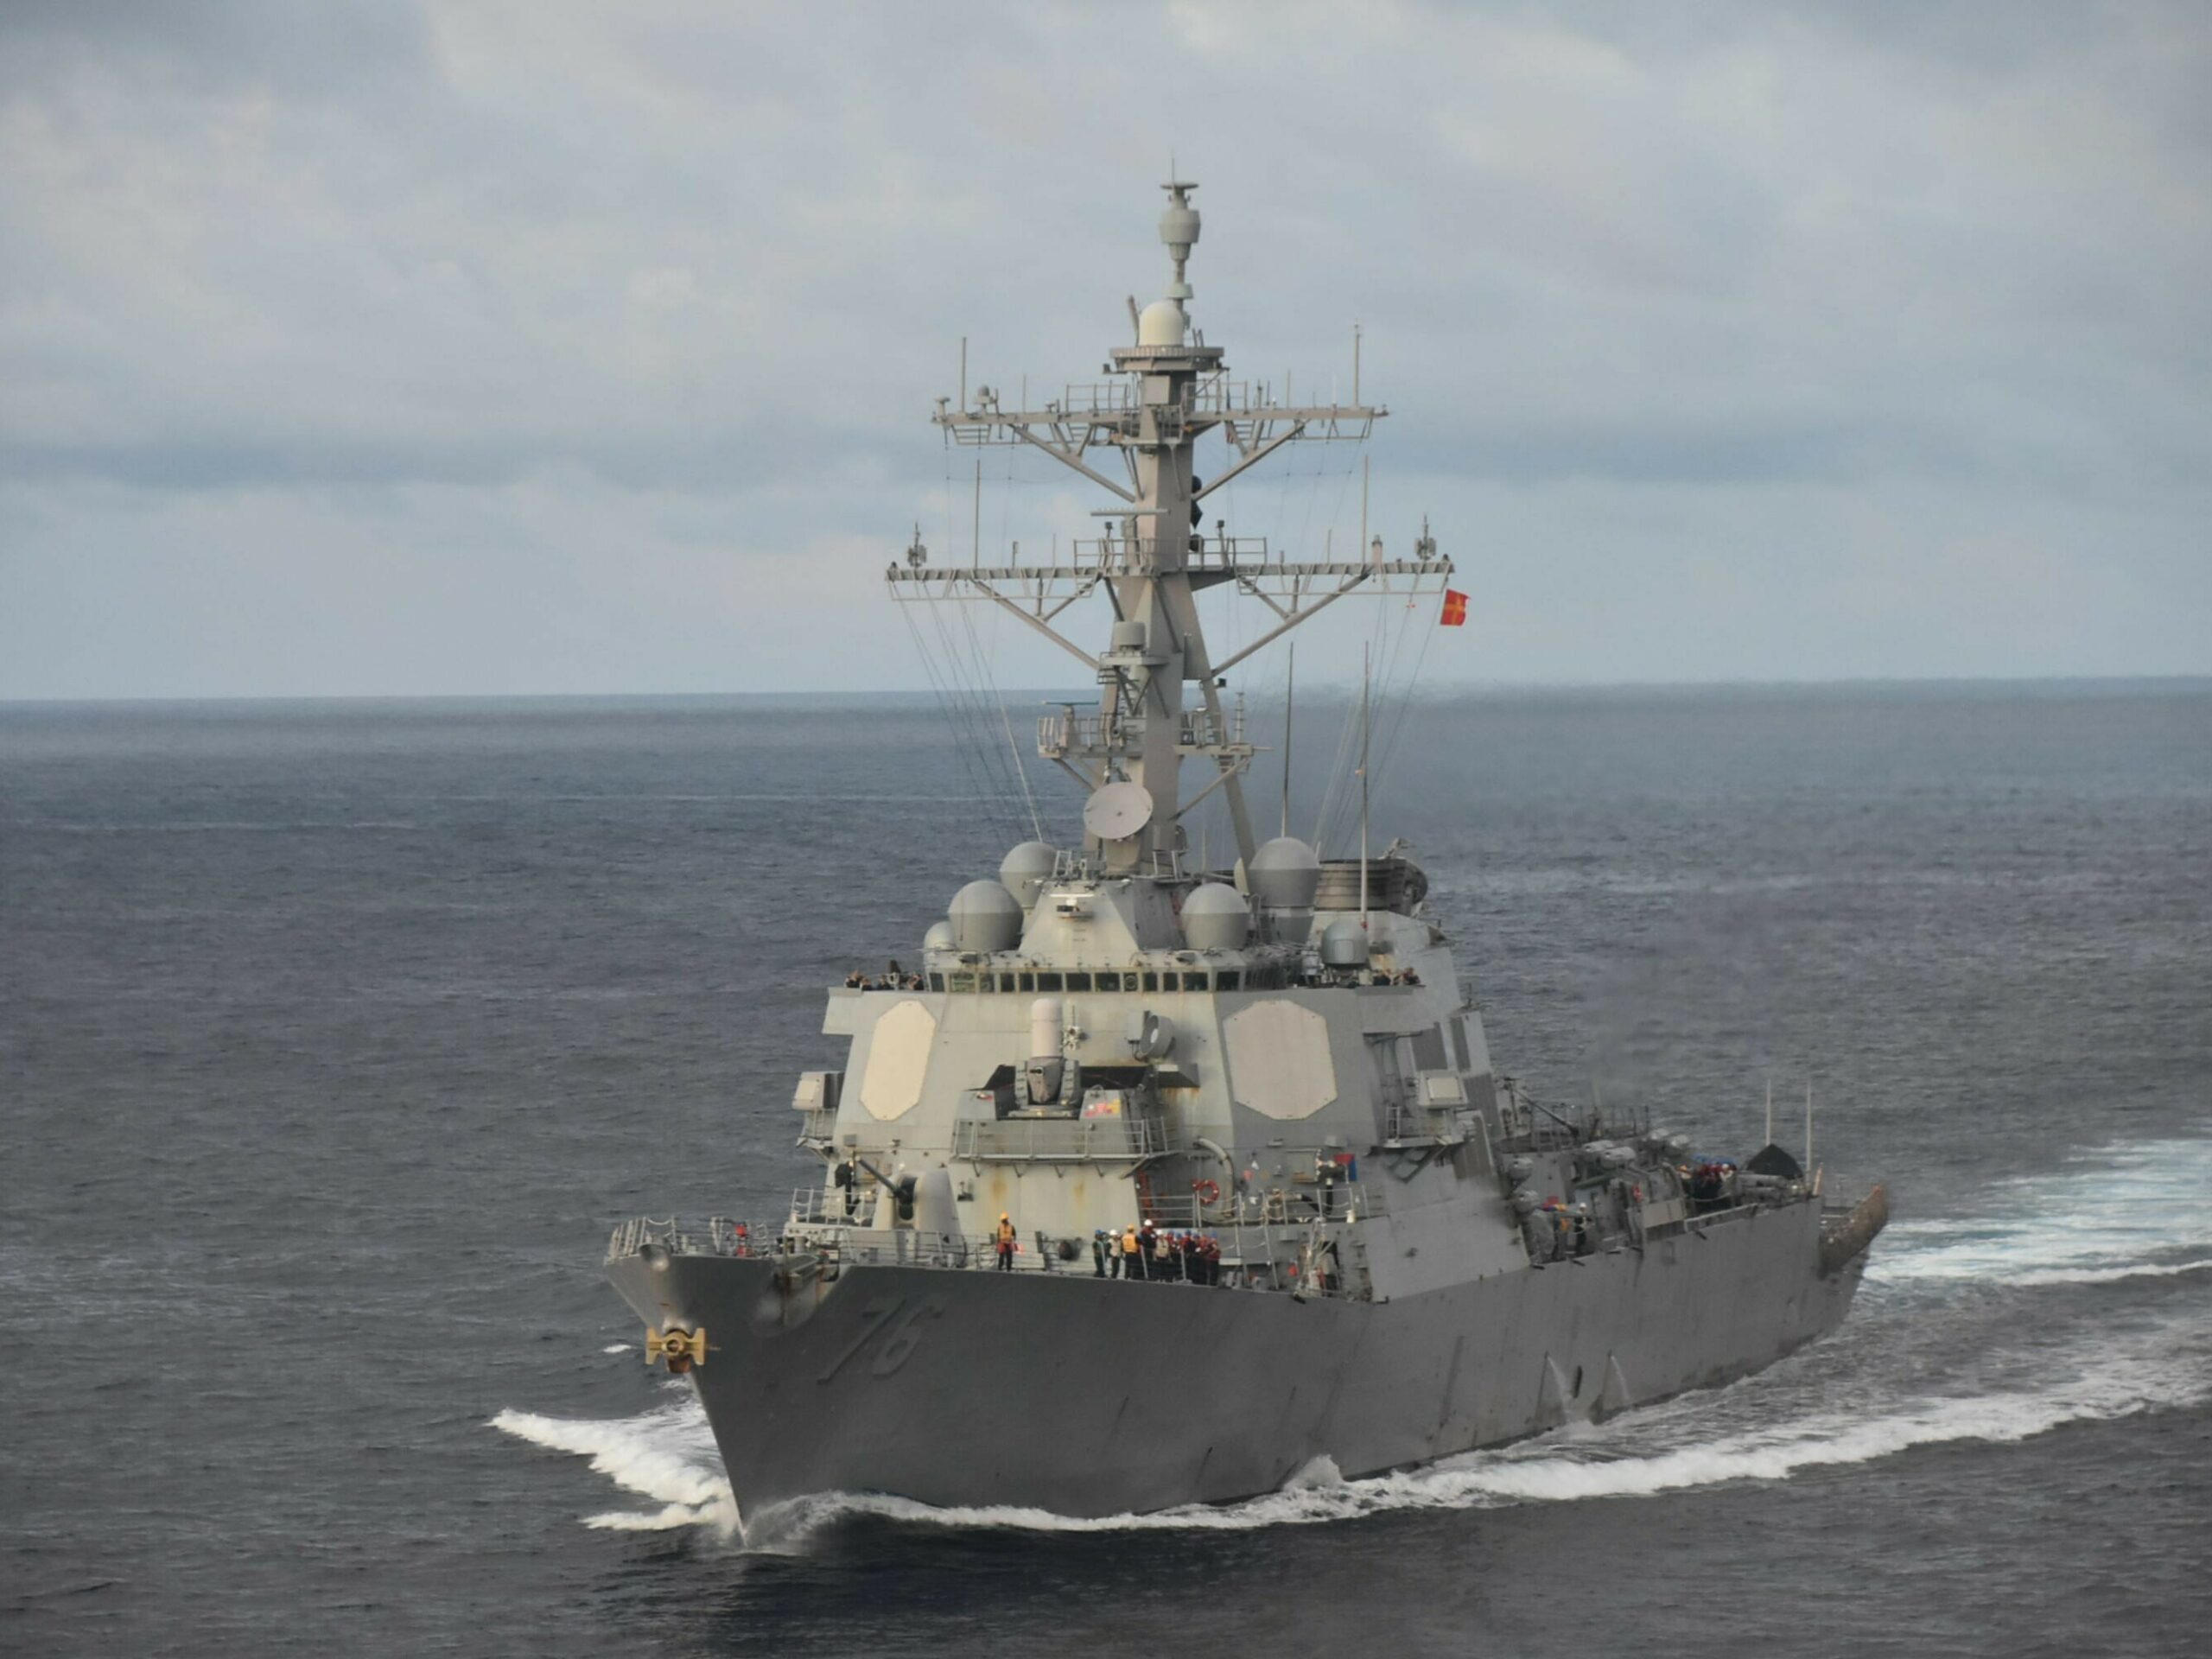 The guided-missile destroyer USS Higgins (DDG 76) is pictured in the South China Sea on July 28, 2022.